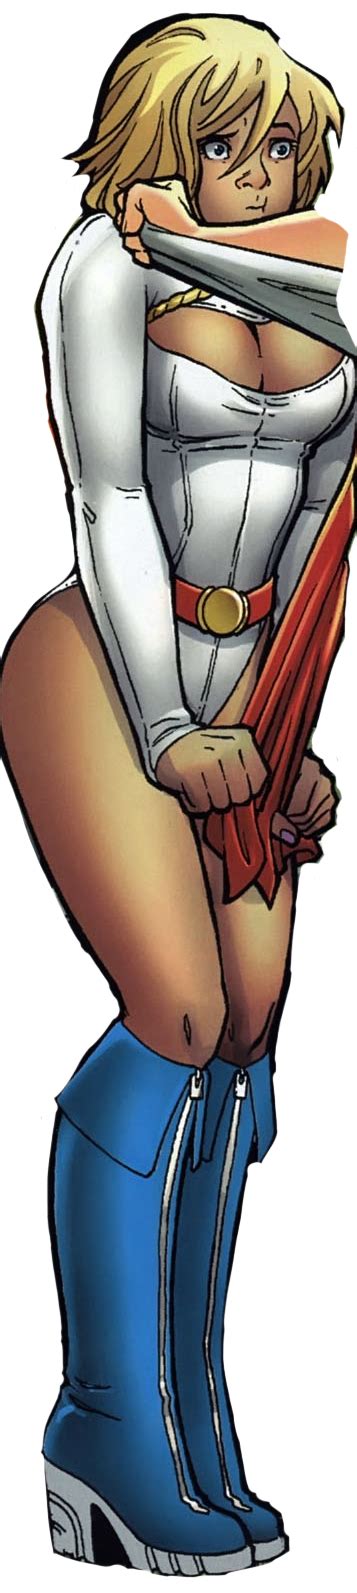 power girl porn images superheroes pictures pictures sorted by oldest first luscious